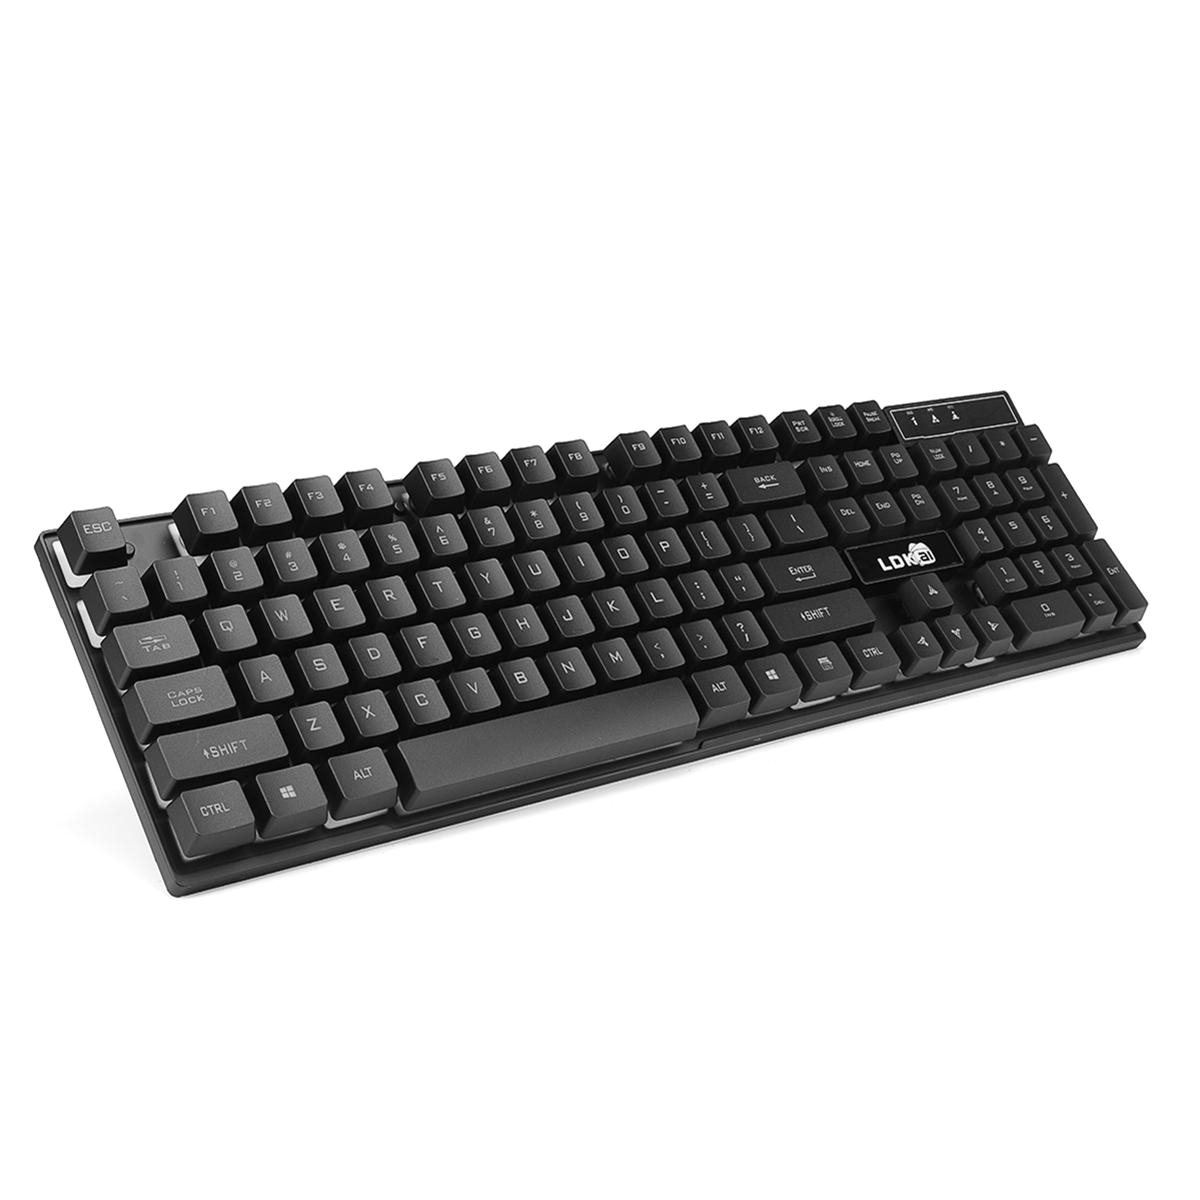 104 key full sized usb wired backlit gaming keyboard for desktop pc computer laptops